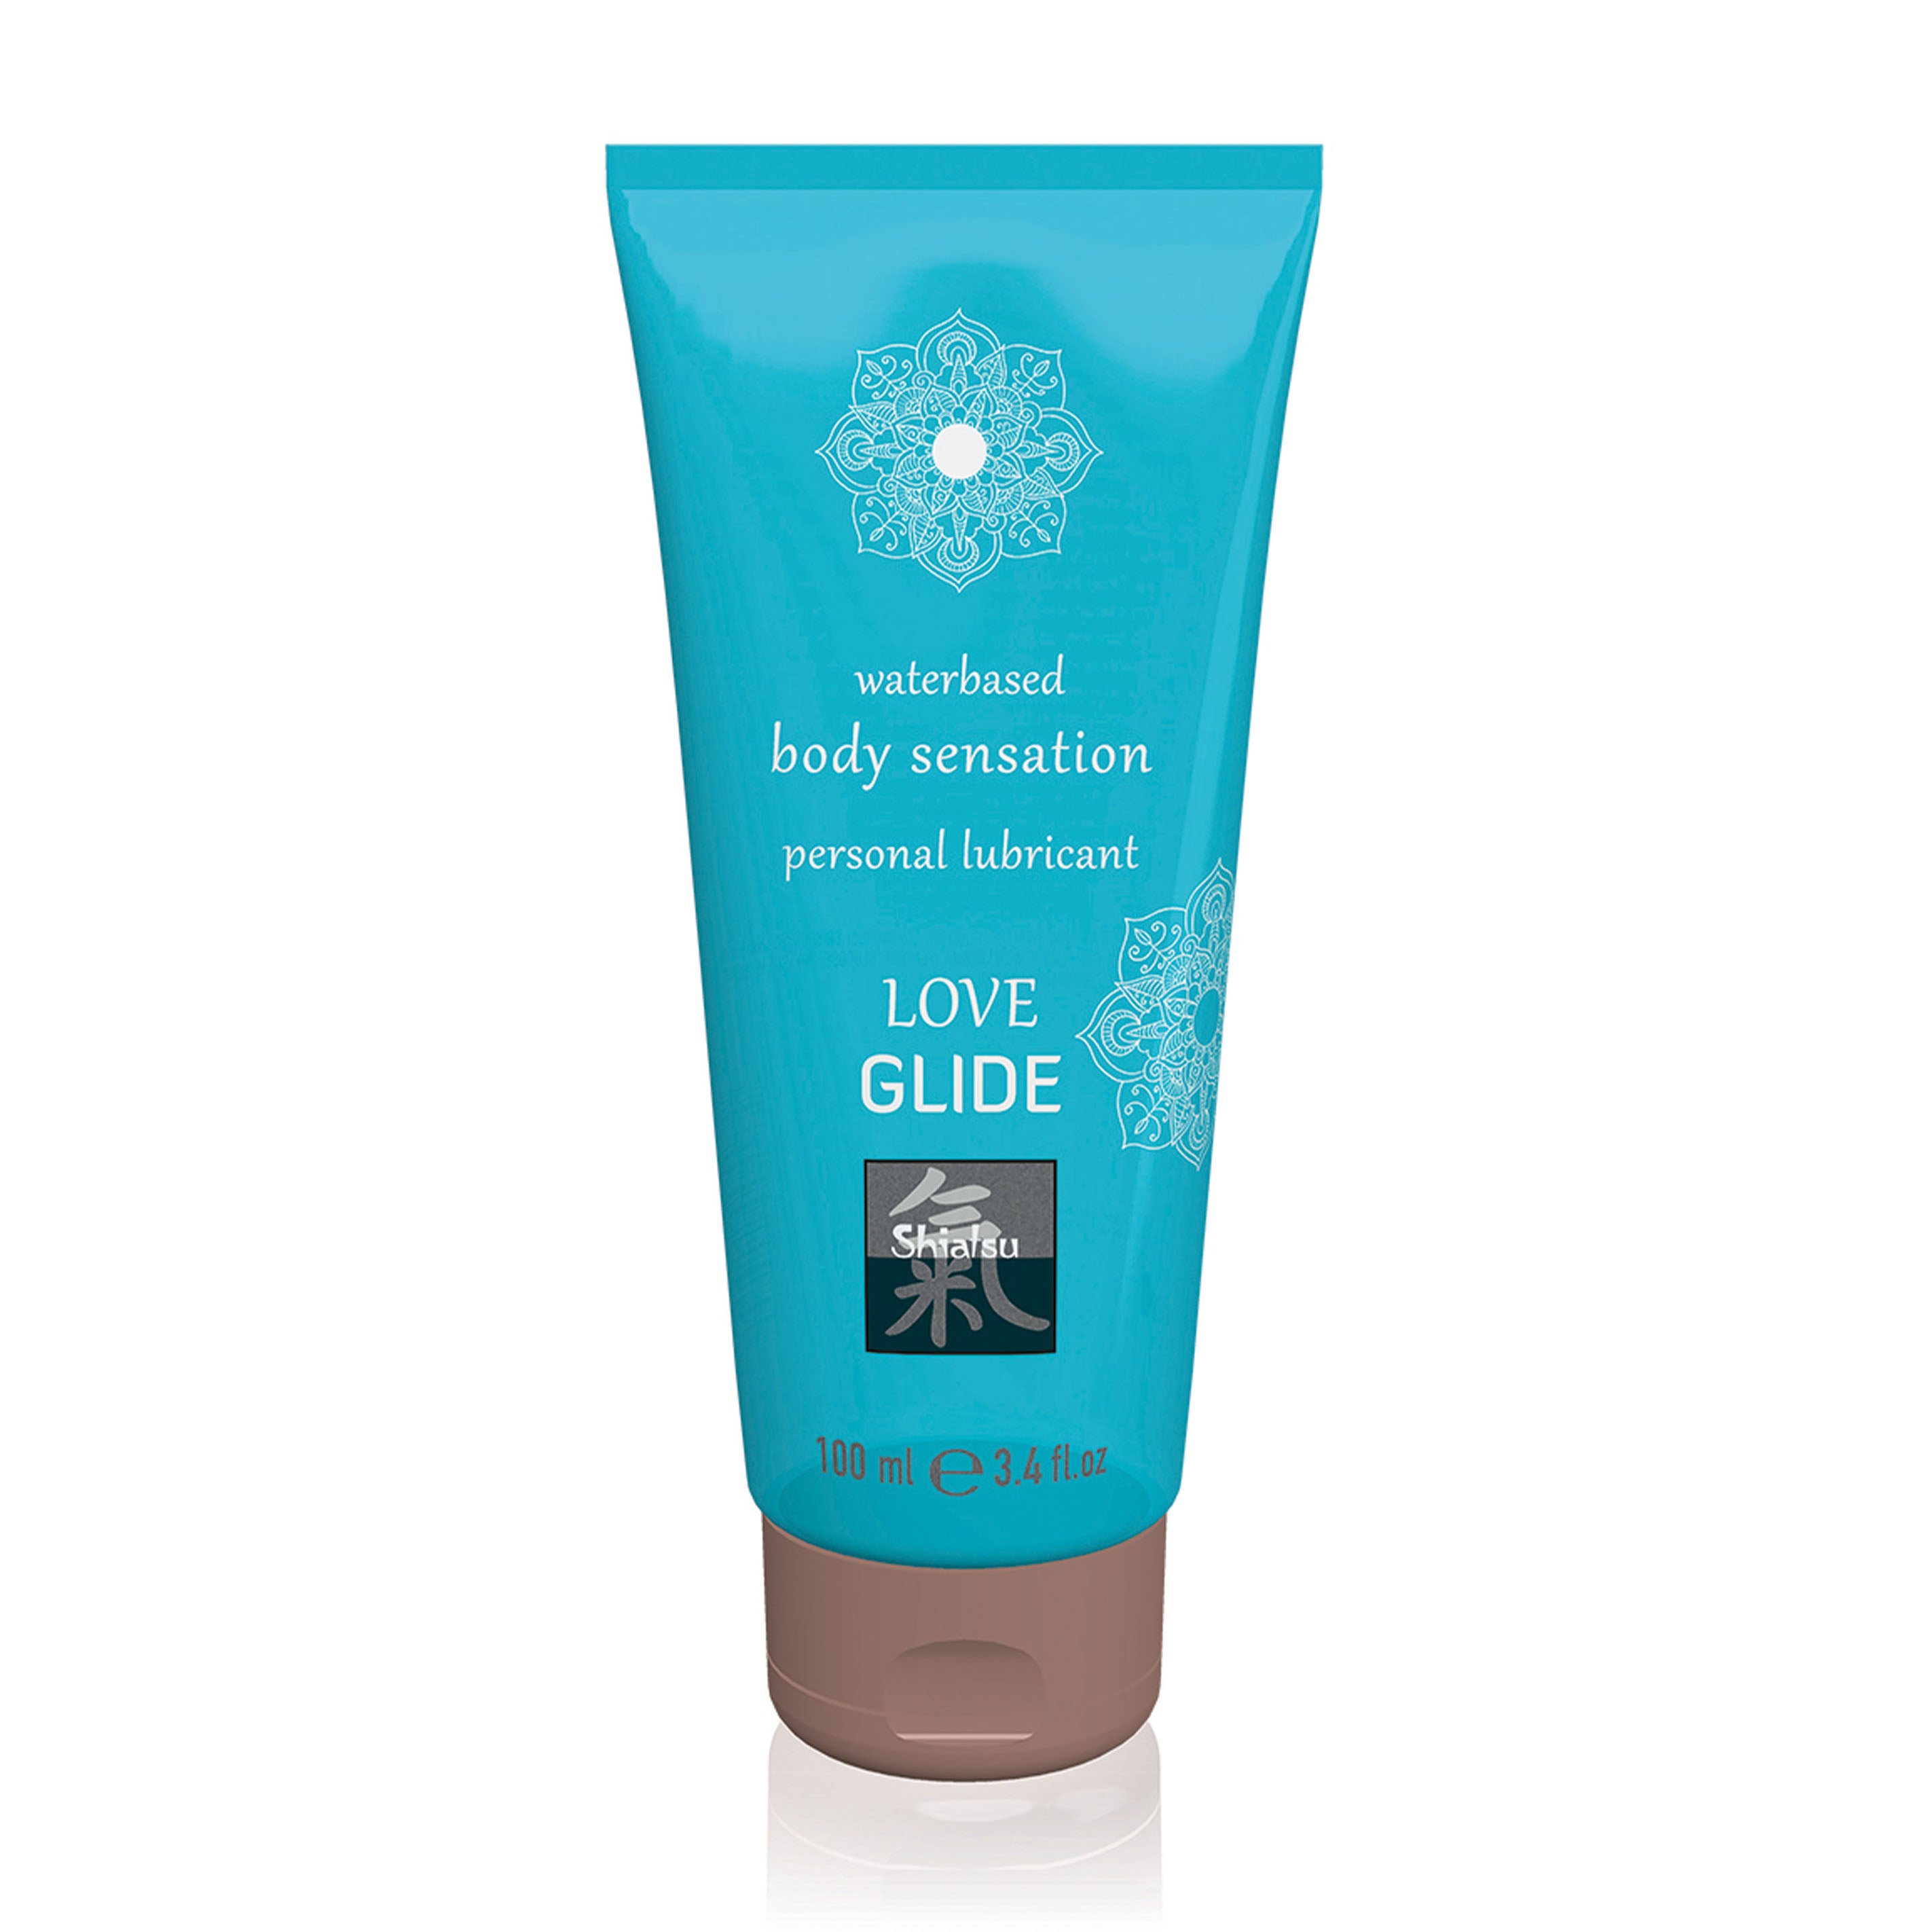 > Relaxation Zone > Lubricants and Oils Shiatsu Love Glide WaterBased Personal Lubricant 100ml   